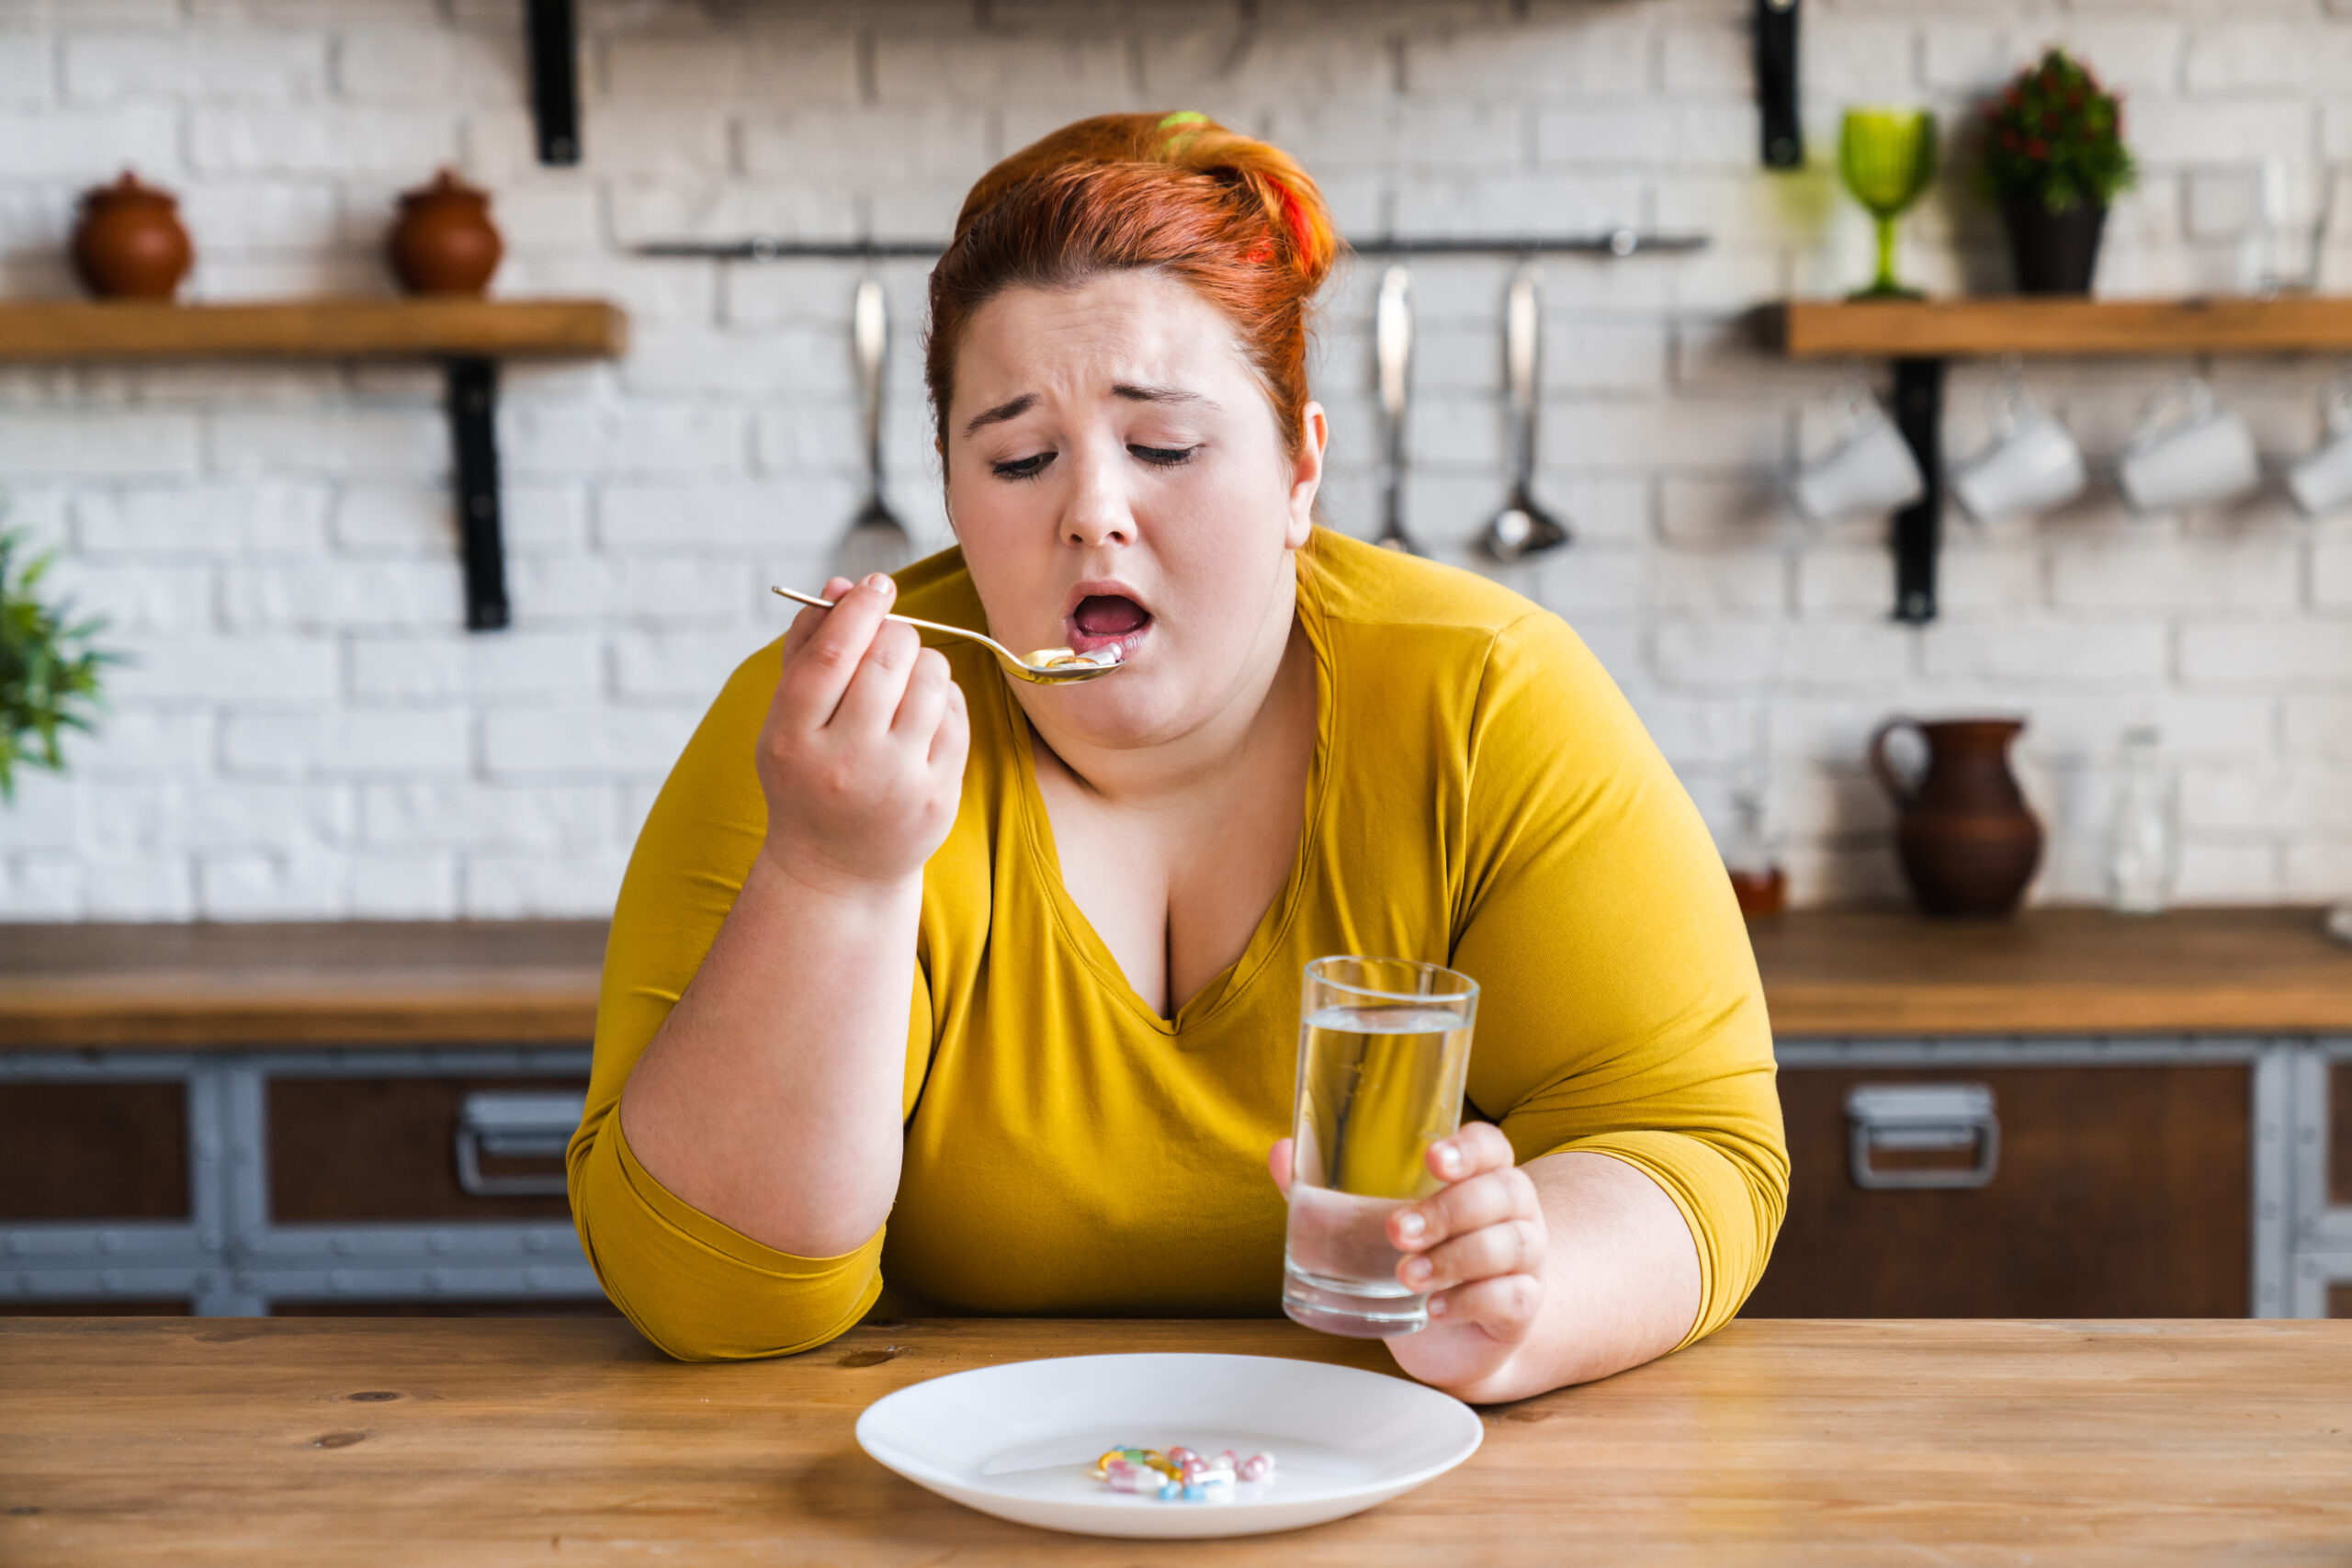 Obese young woman looking tired, and eating pills.